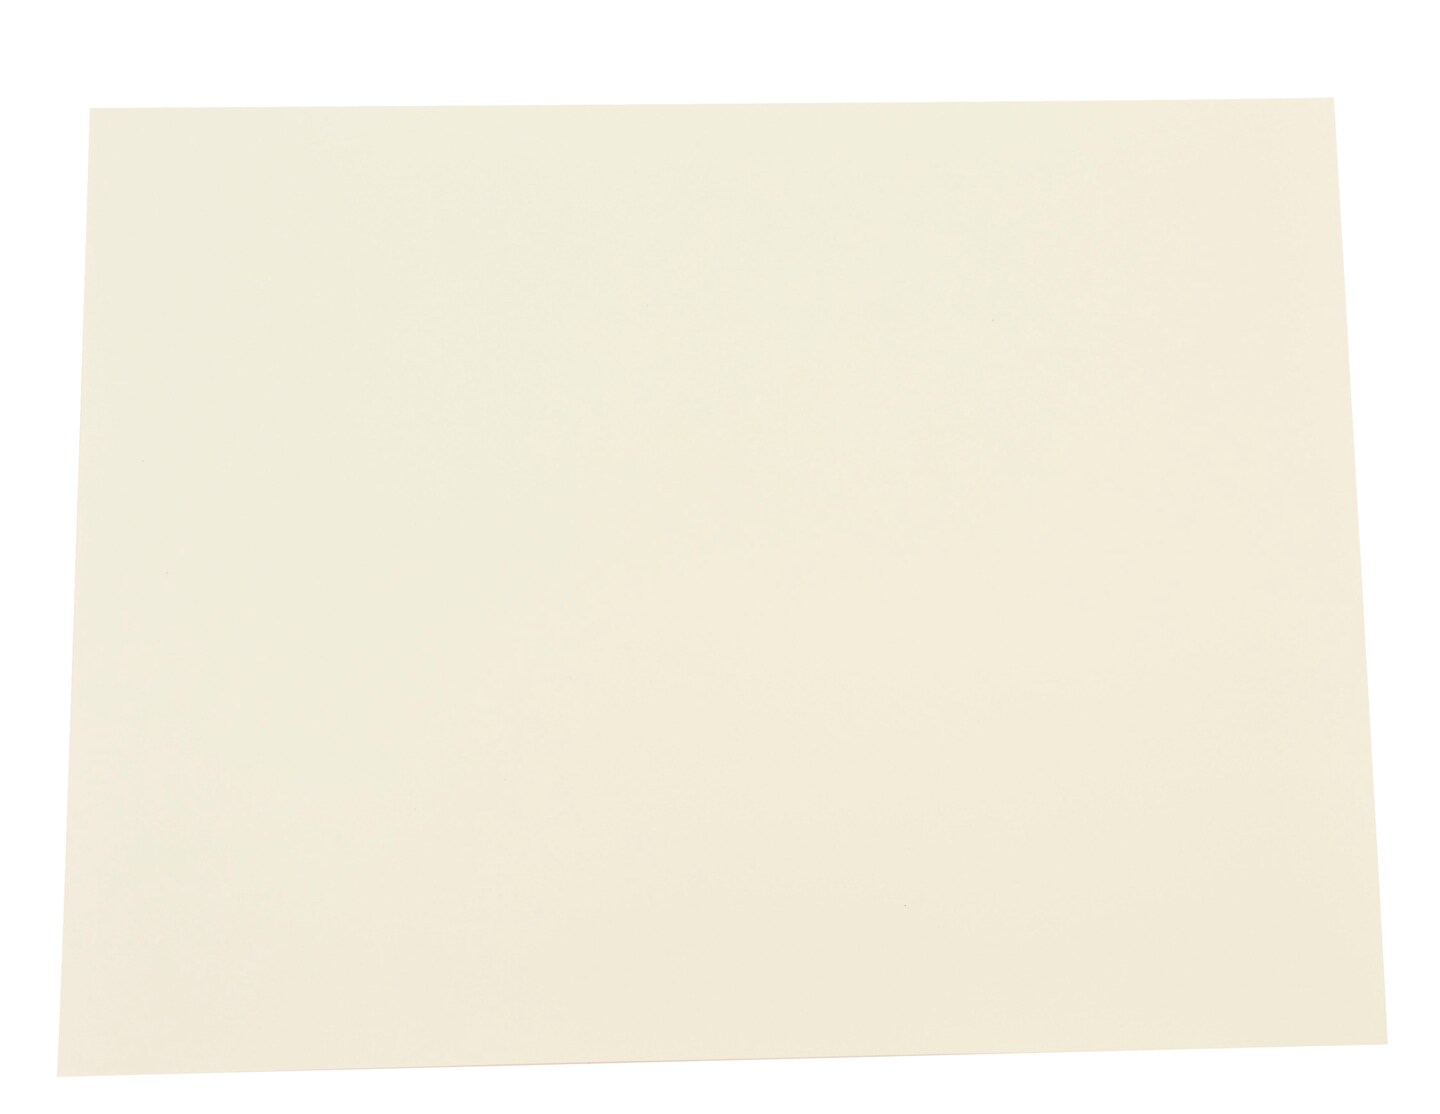 Sax Watercolor Paper, 24 x 36 Inches, 140 lb, Natural White, 100 Sheets